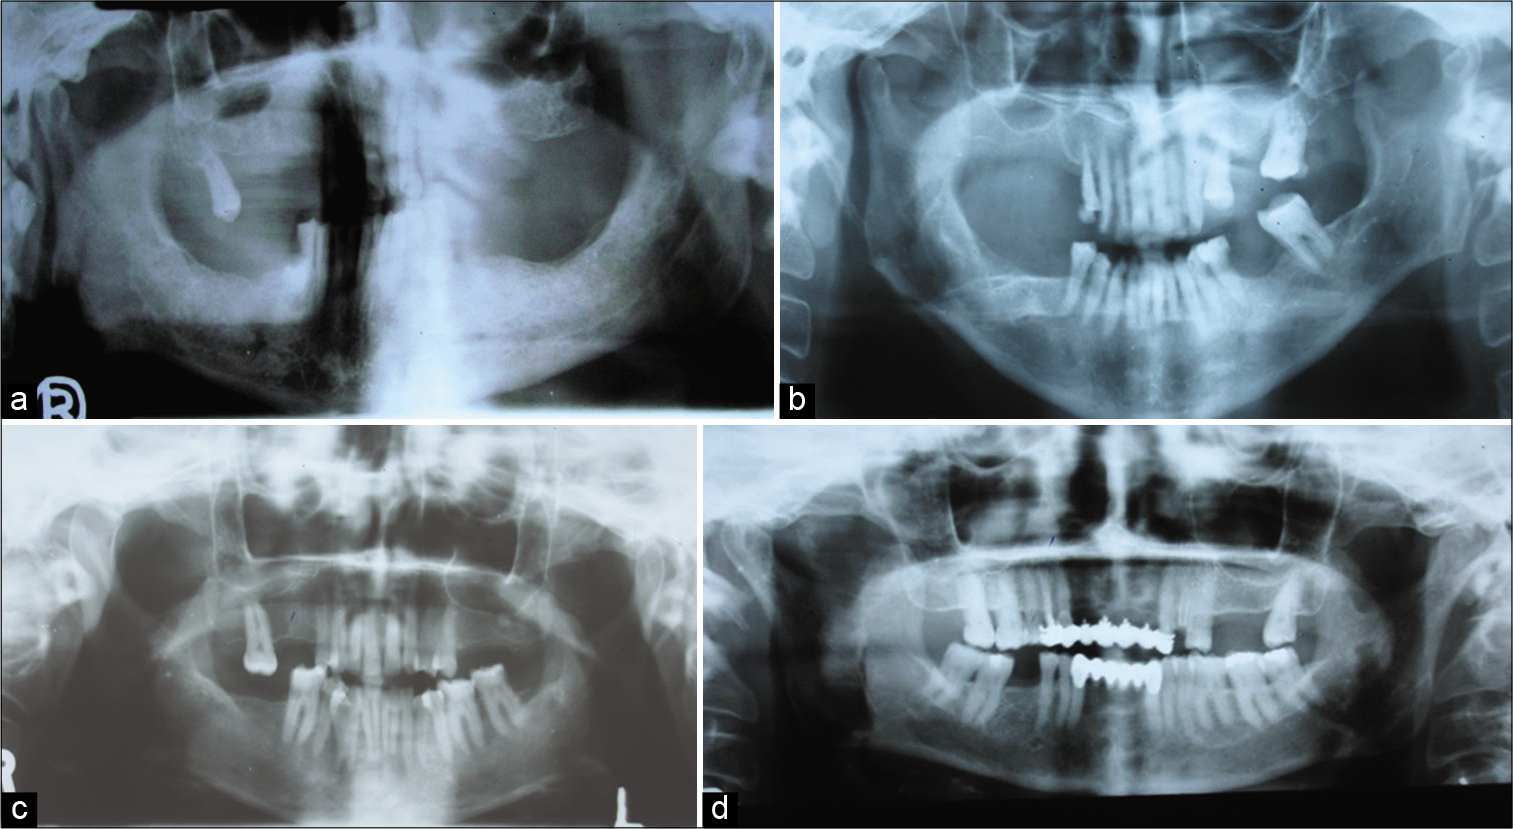 (a) Panoramic view shows round-shaped right and pointed shaped left side condyle Eichner Class B (e.g., Figure 1b and 2d and b). (b) Panoramic view shows pointed shaped right and angled shaped left side condyle Eichner Class B (e.g., Figure 1b and 2b and c). (c) Panoramic view shows flat-shaped right and pointed shaped left side condyle Eichner Class B (e.g., Figure 1b and 2a and c). (d) Panoramic view shows angled shaped right and round-shaped left side condyle Eichner Class B (e.g., Figure 1b and 2c and d).